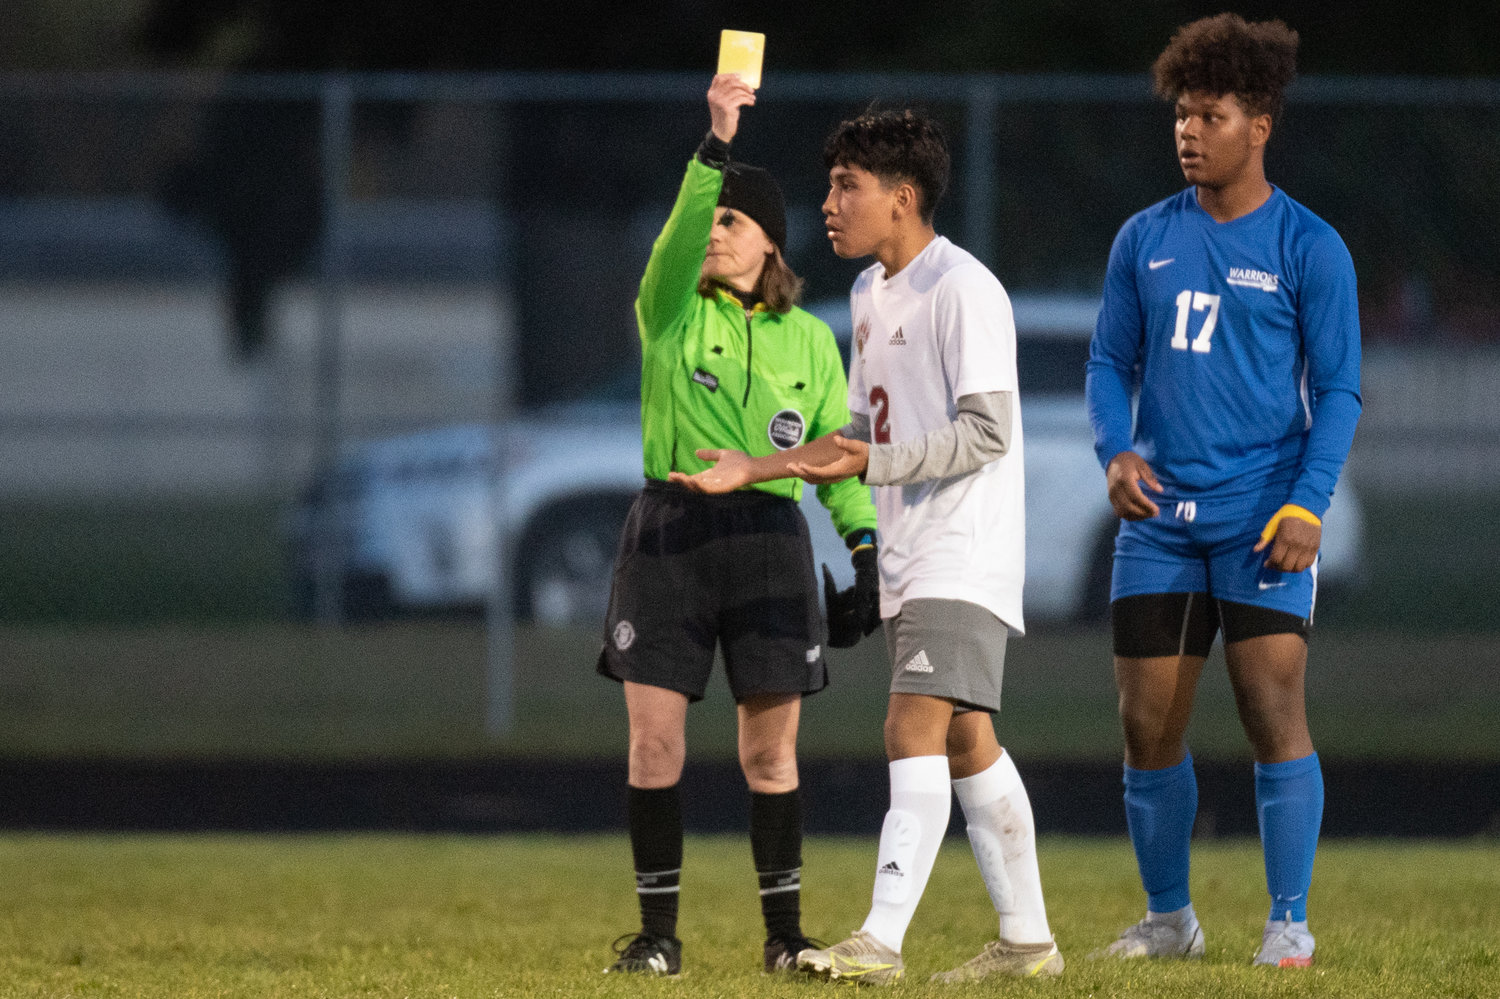 W.F. West's Adrian Jaimes is handed a yellow card after his goal against Rochester April 19.